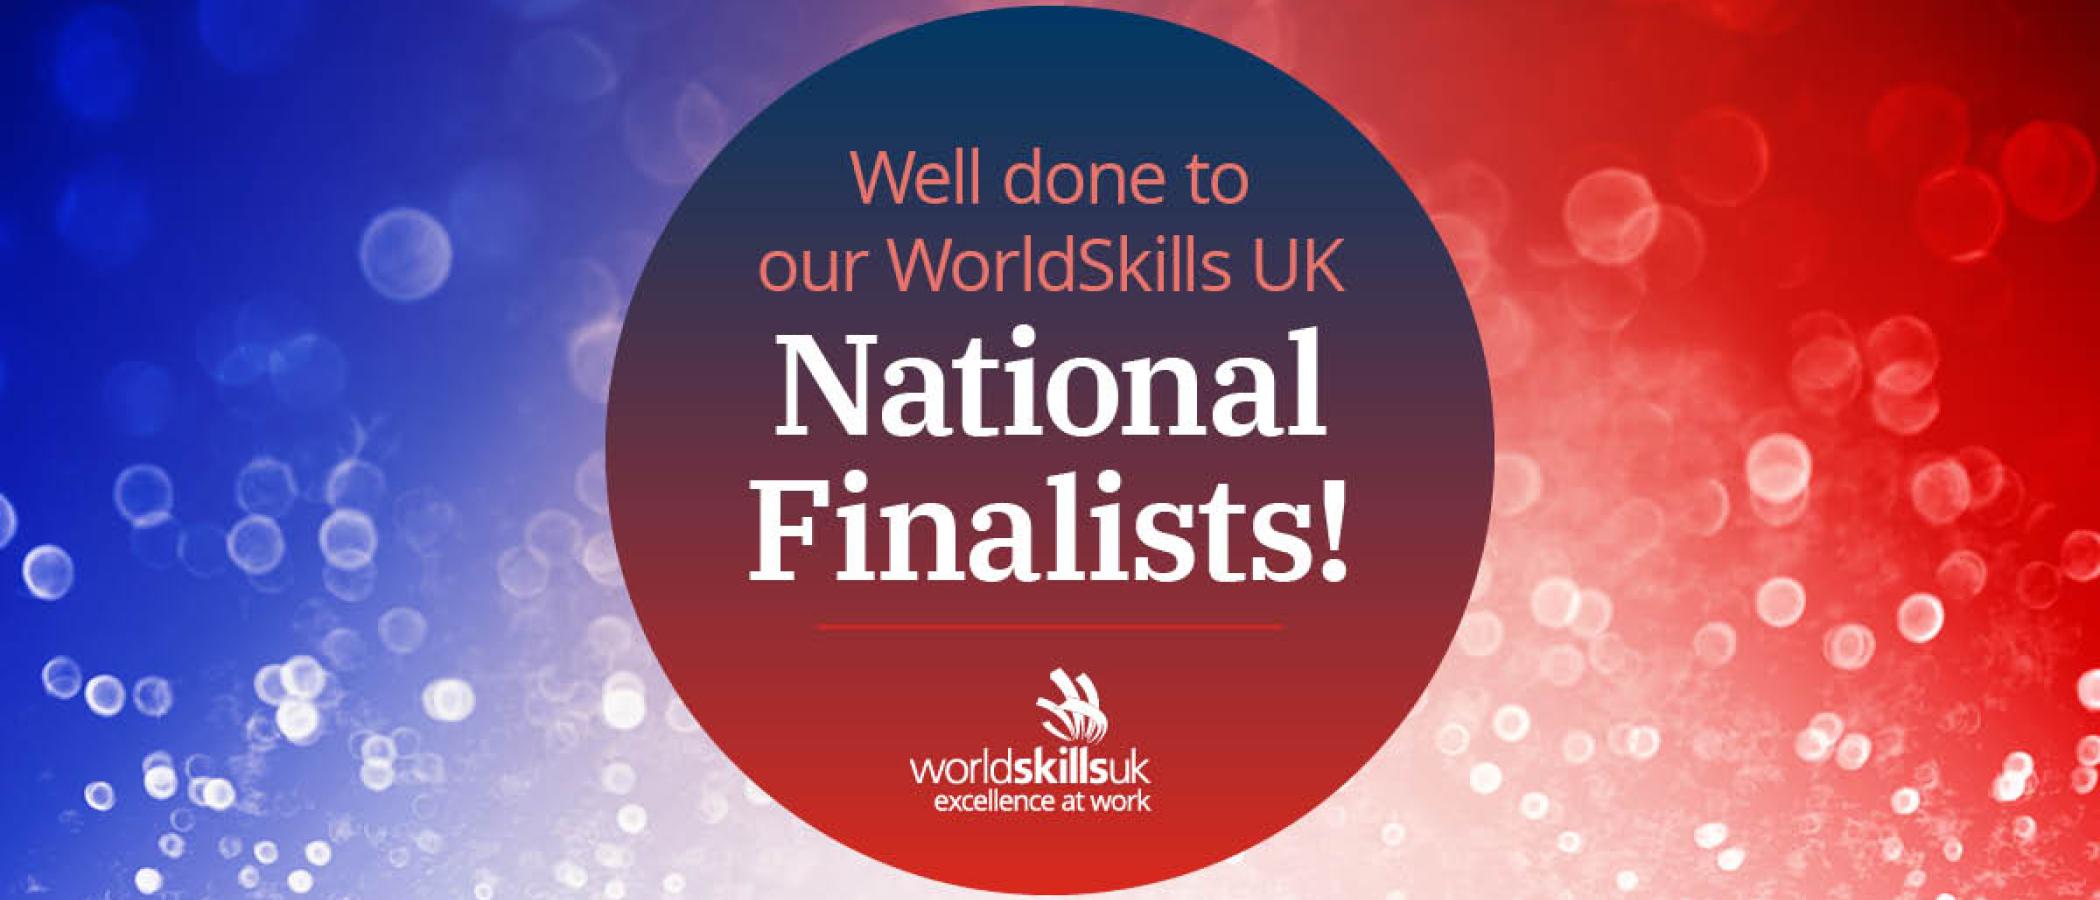 Well done to Worldskills National finalists logo